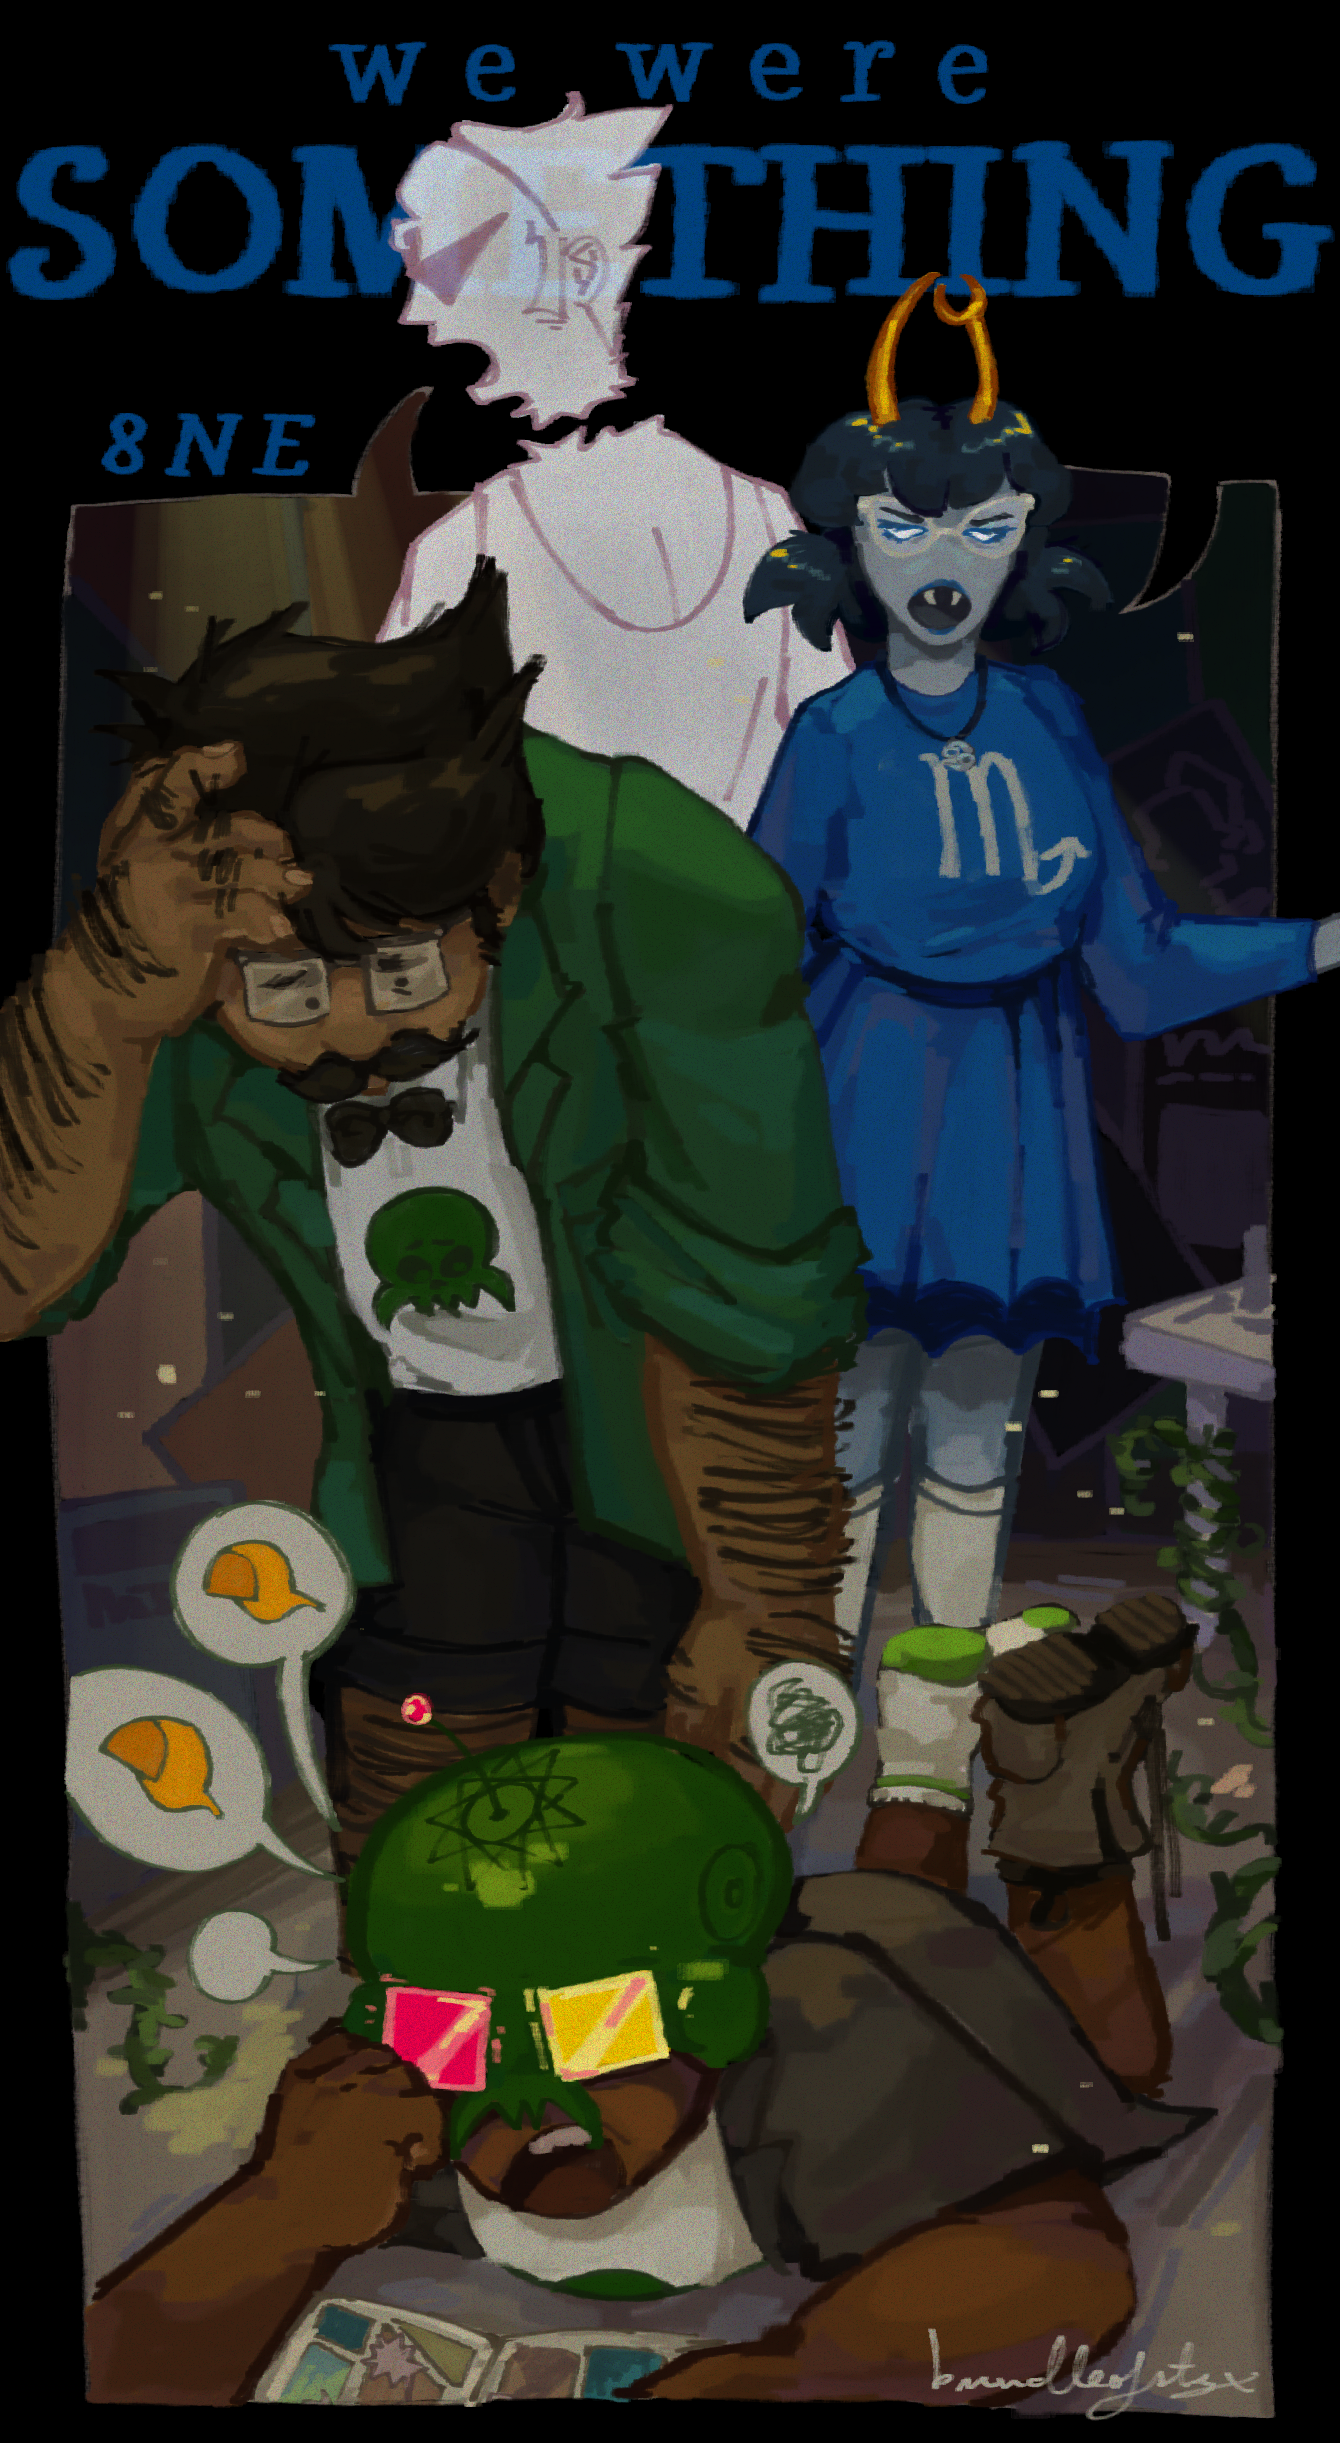 A painting showing a young Jake English wearing his skulltop chatting to Dirk Strider while reading a comic. Above him stands an older Jake English, staring incredulously, Aranea Serket, and Brain Ghost Dirk. The whole scene is in a speech bubble being spoken by Aranea and BGD. At the top of the painting is written: we were something, 8ne